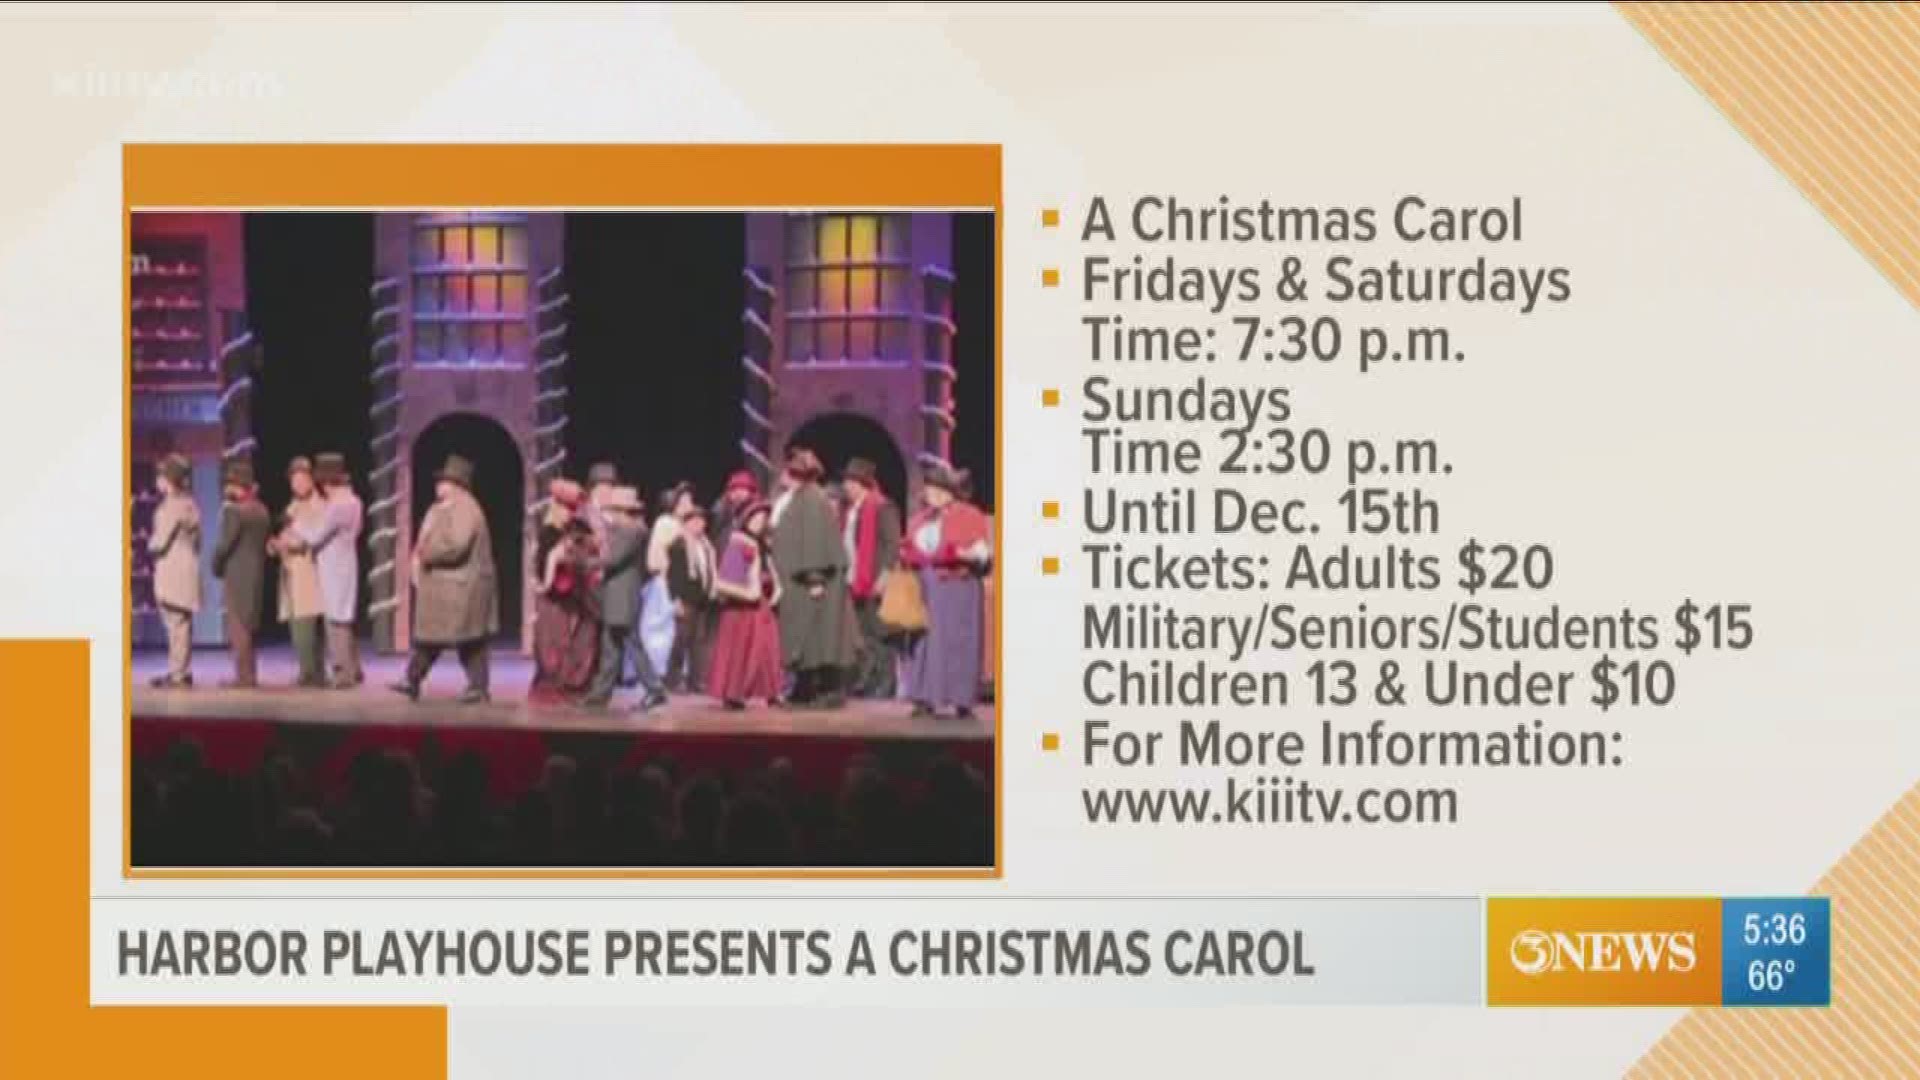 The youngest performers in A Christmas Carol explain the magic of this beloved holiday show.